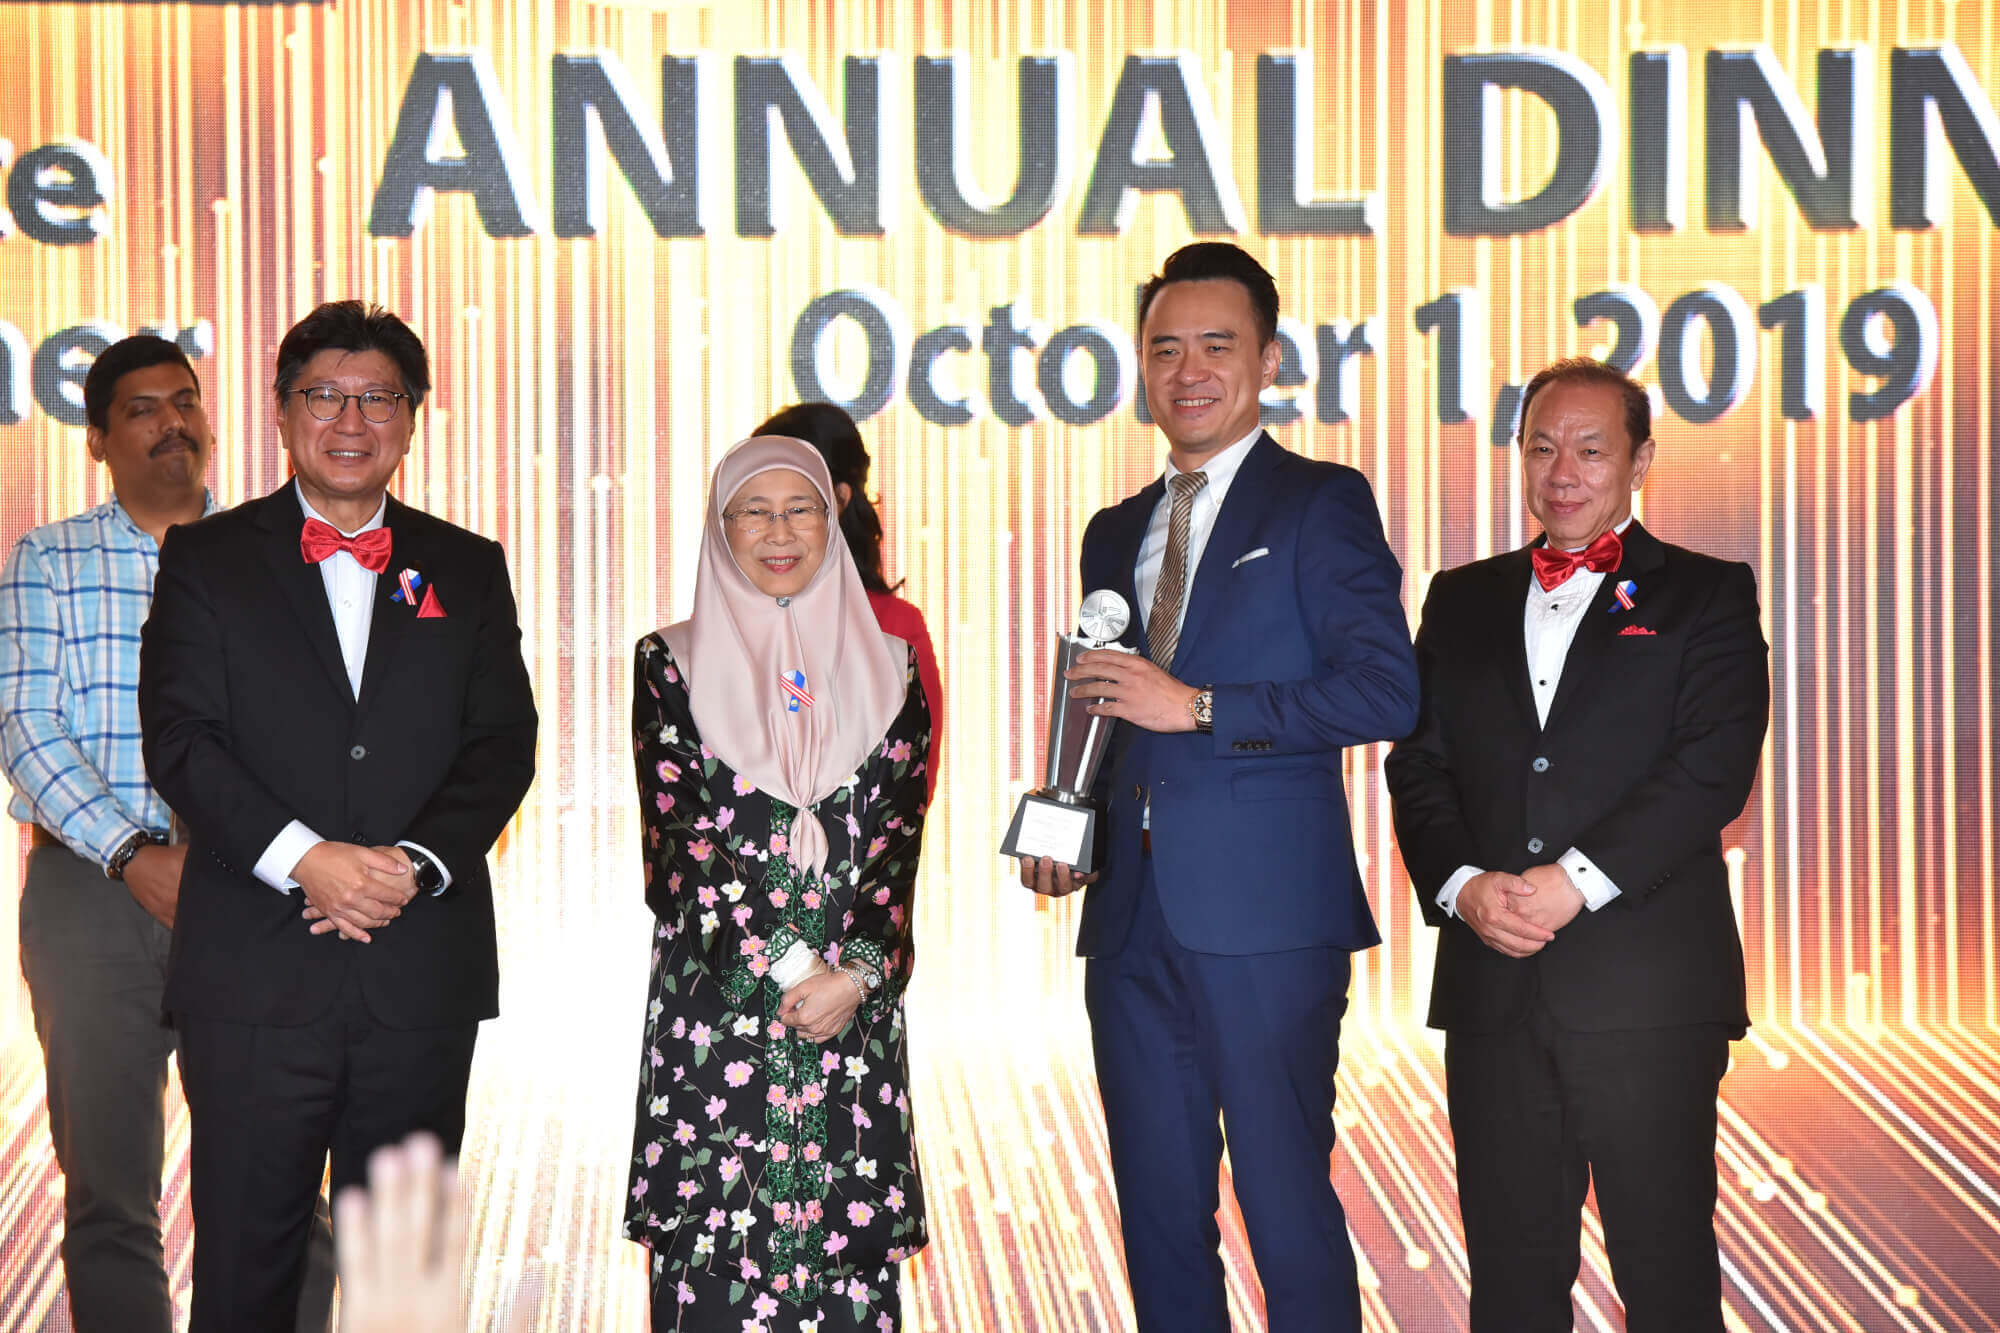 FMM Excellence Award (Gold-SMI Category) Oct 2019
